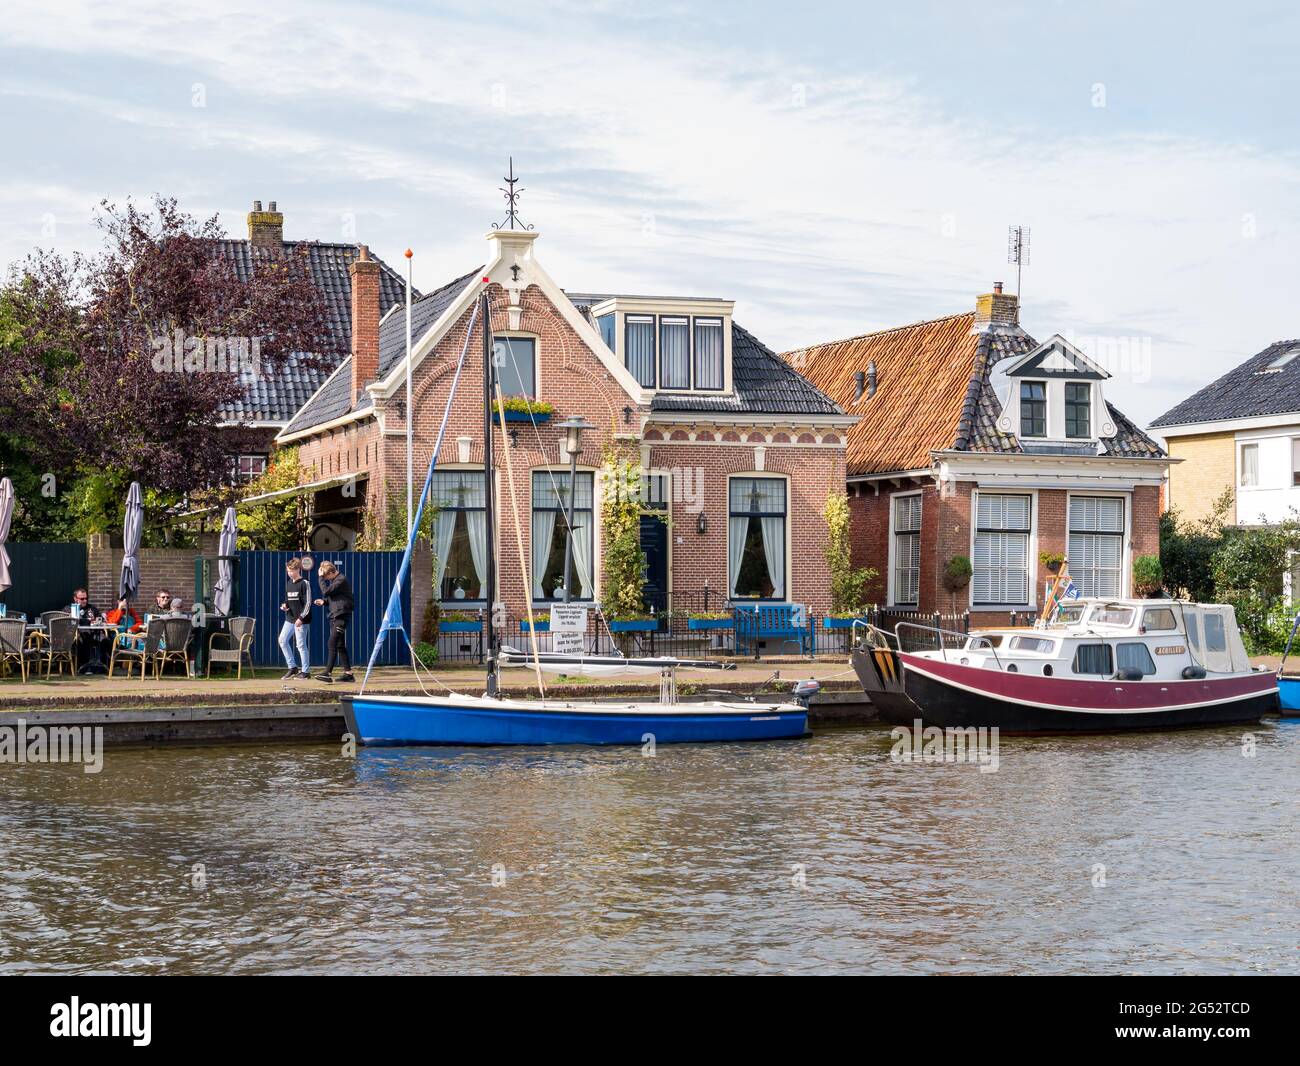 Boats and houses on quay of Ee canal in village of Woudsend in Friesland, Netherlands Stock Photo